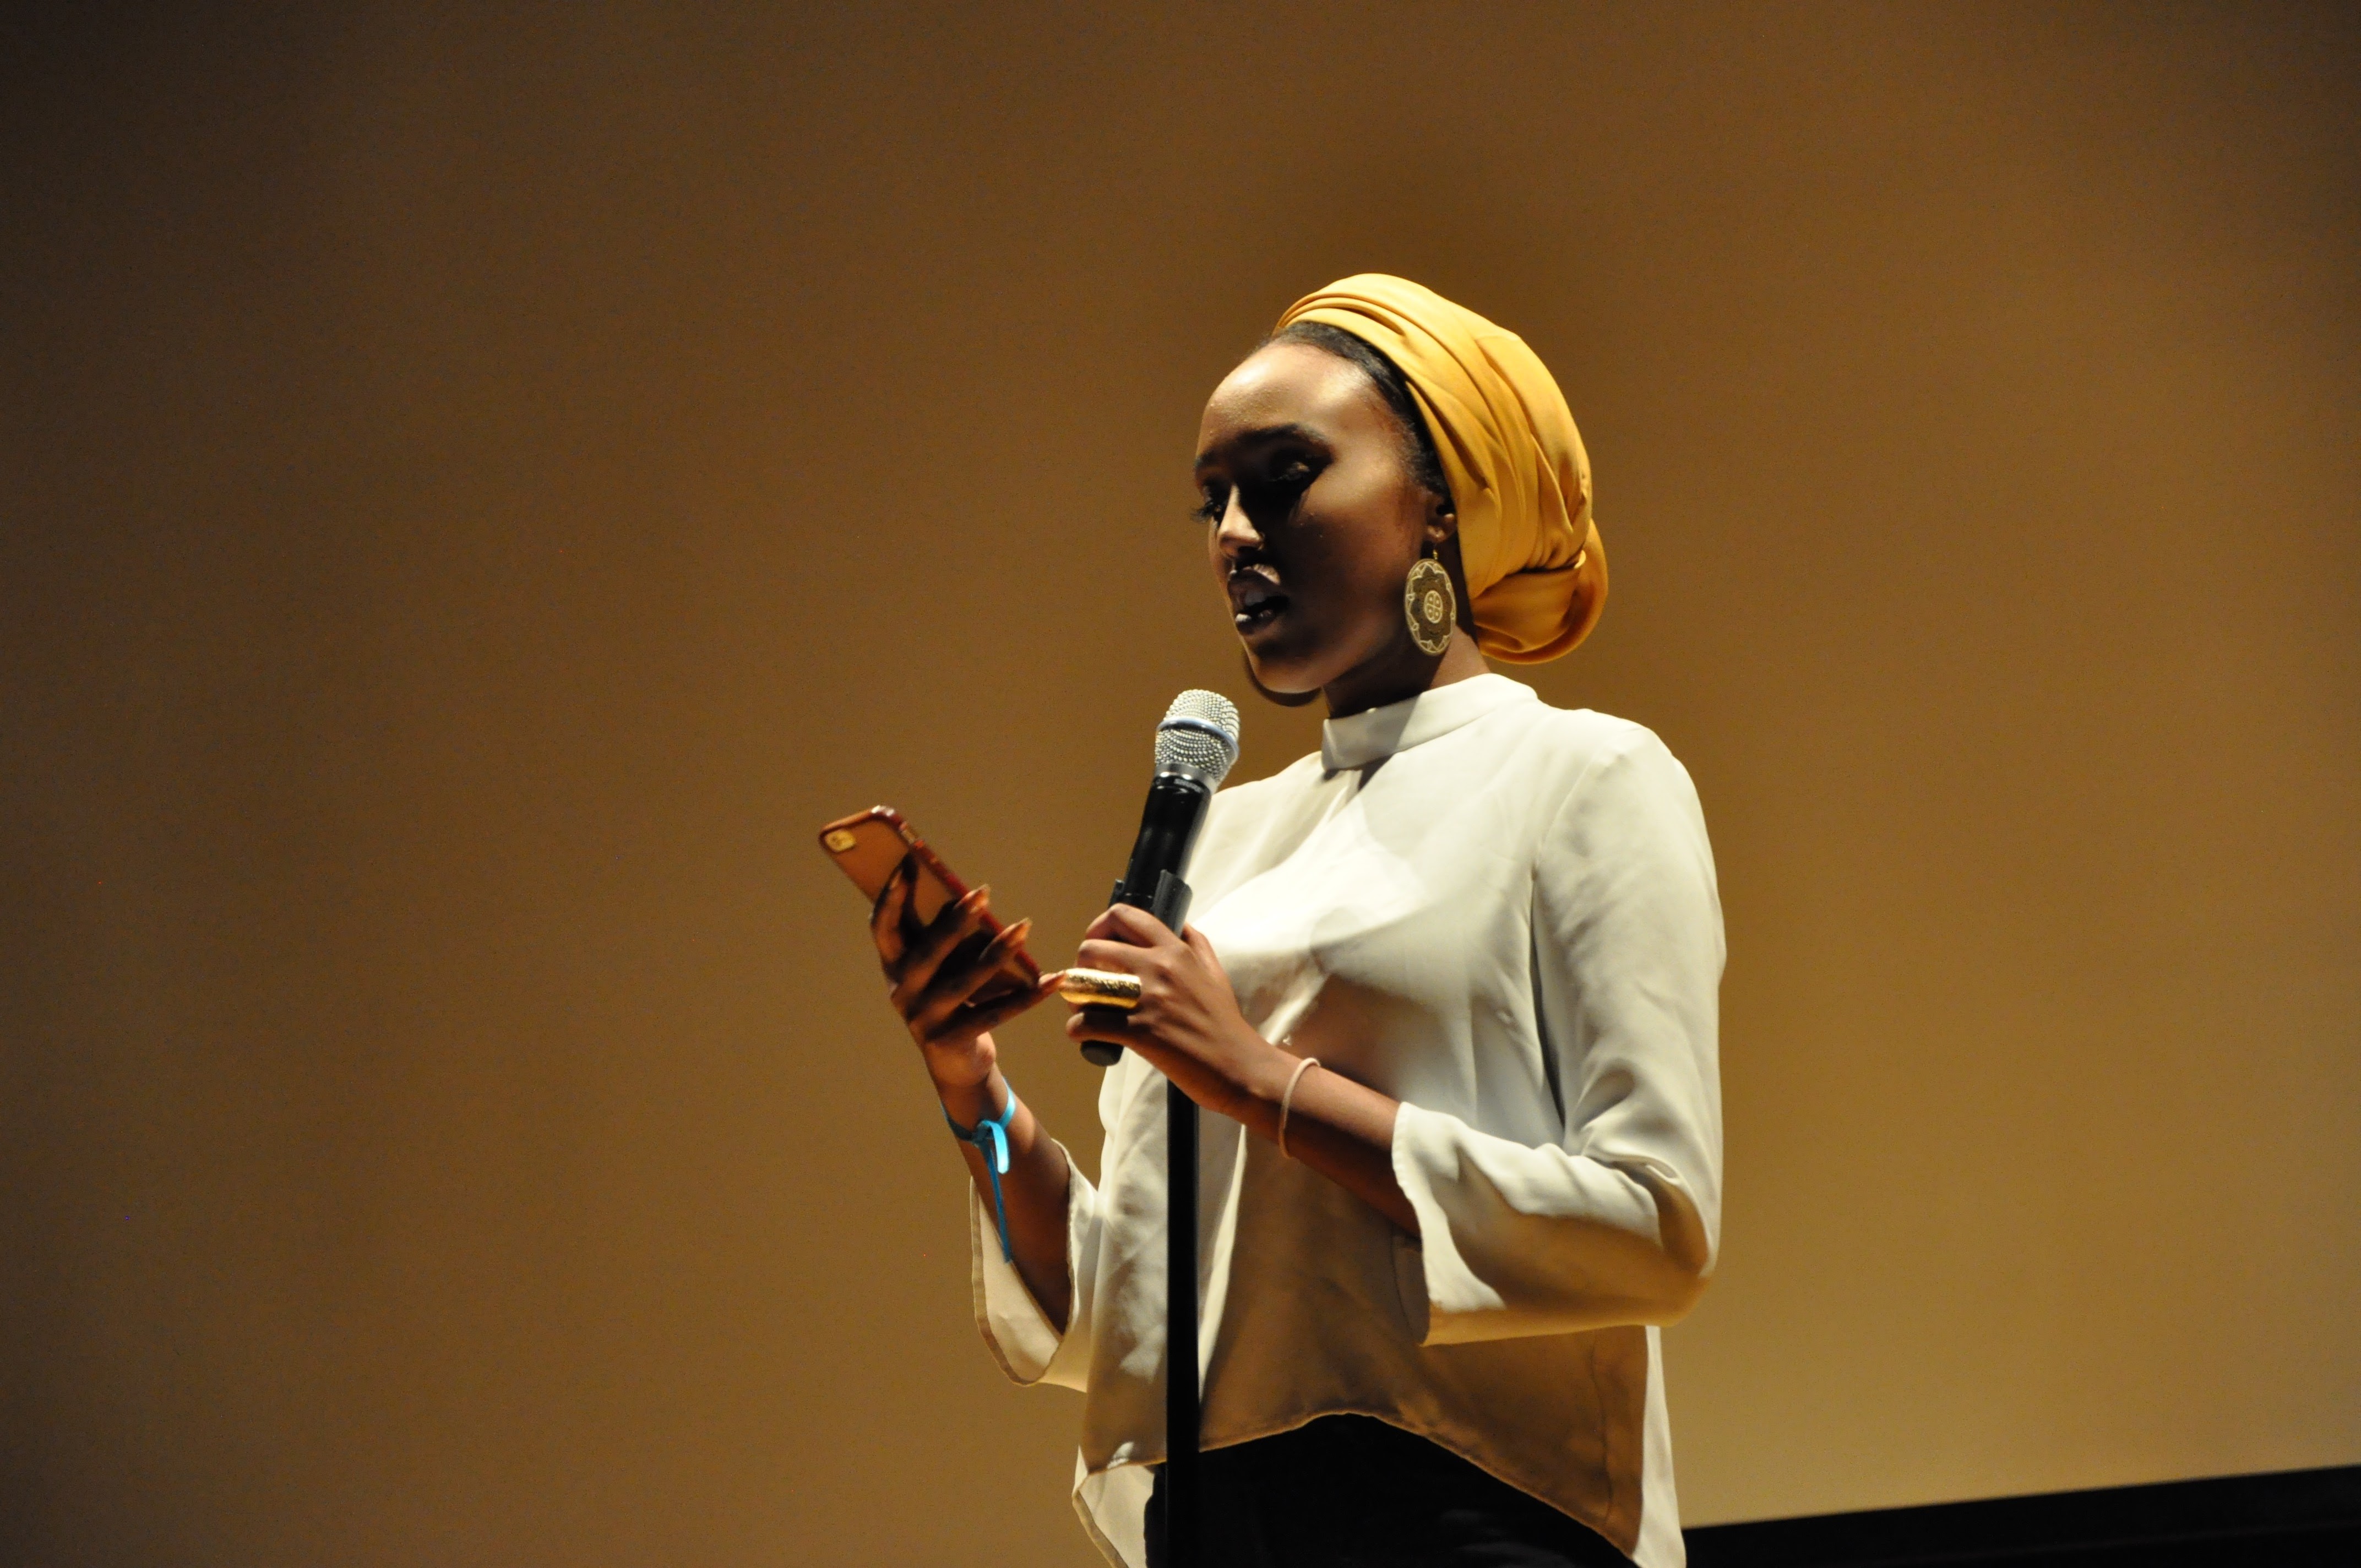 Edil Yousef, president of the SSA at Mills College in Oakland, California and poet, performs a poem before the crowd at the first annual Somali Student Association National Conference on March 31. Credit: Hailey Stangebye | Lantern reporter